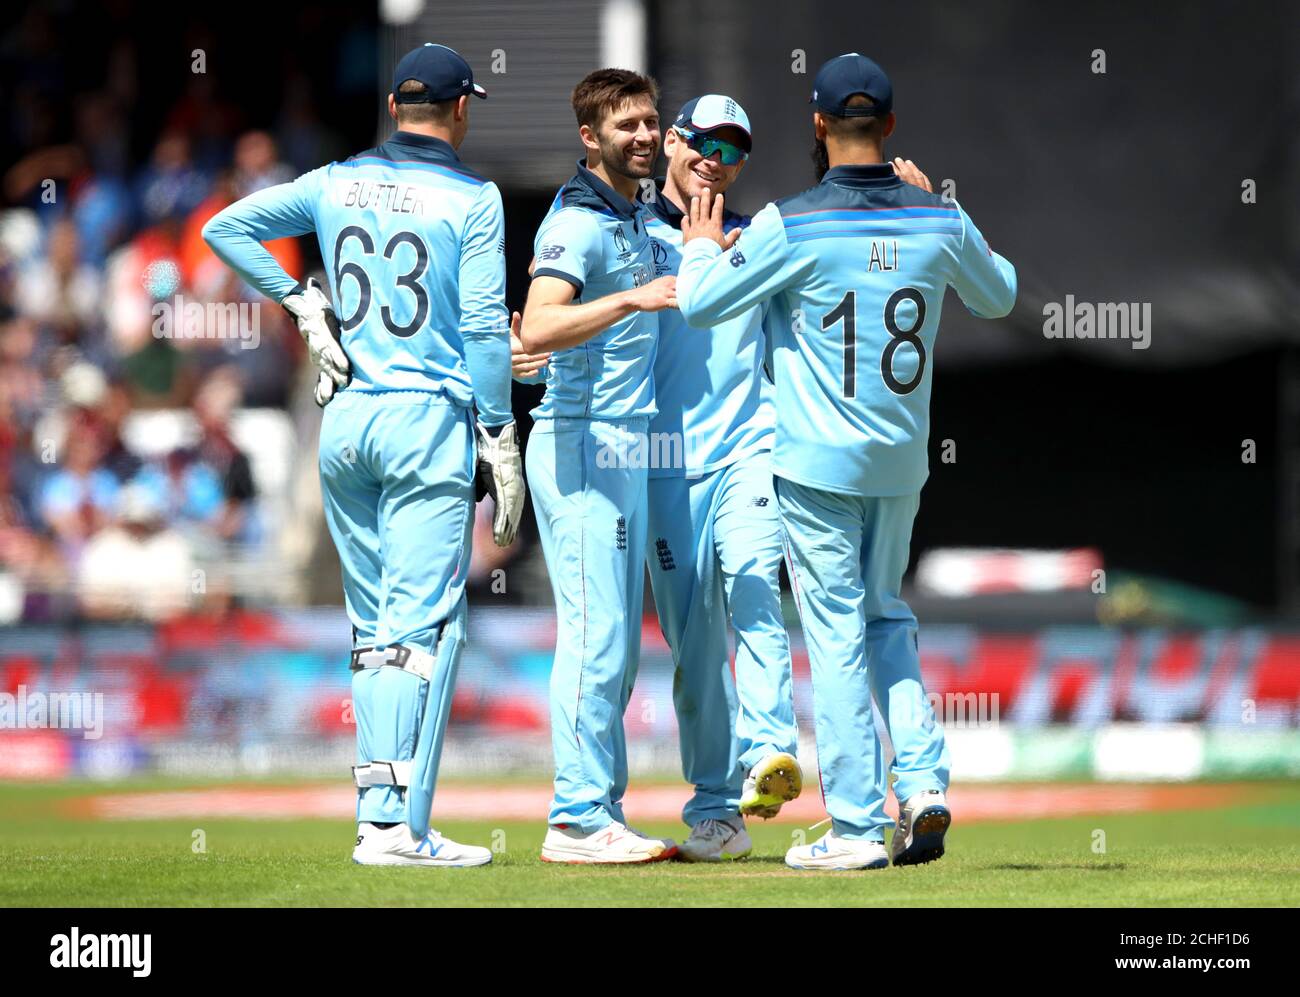 England's Mark Wood (second left) celebrates with his team mates after taking the wicket of Sri Lanka's Lasith Malinga during the ICC Cricket World Cup group stage match at Headingley, Leeds. Stock Photo